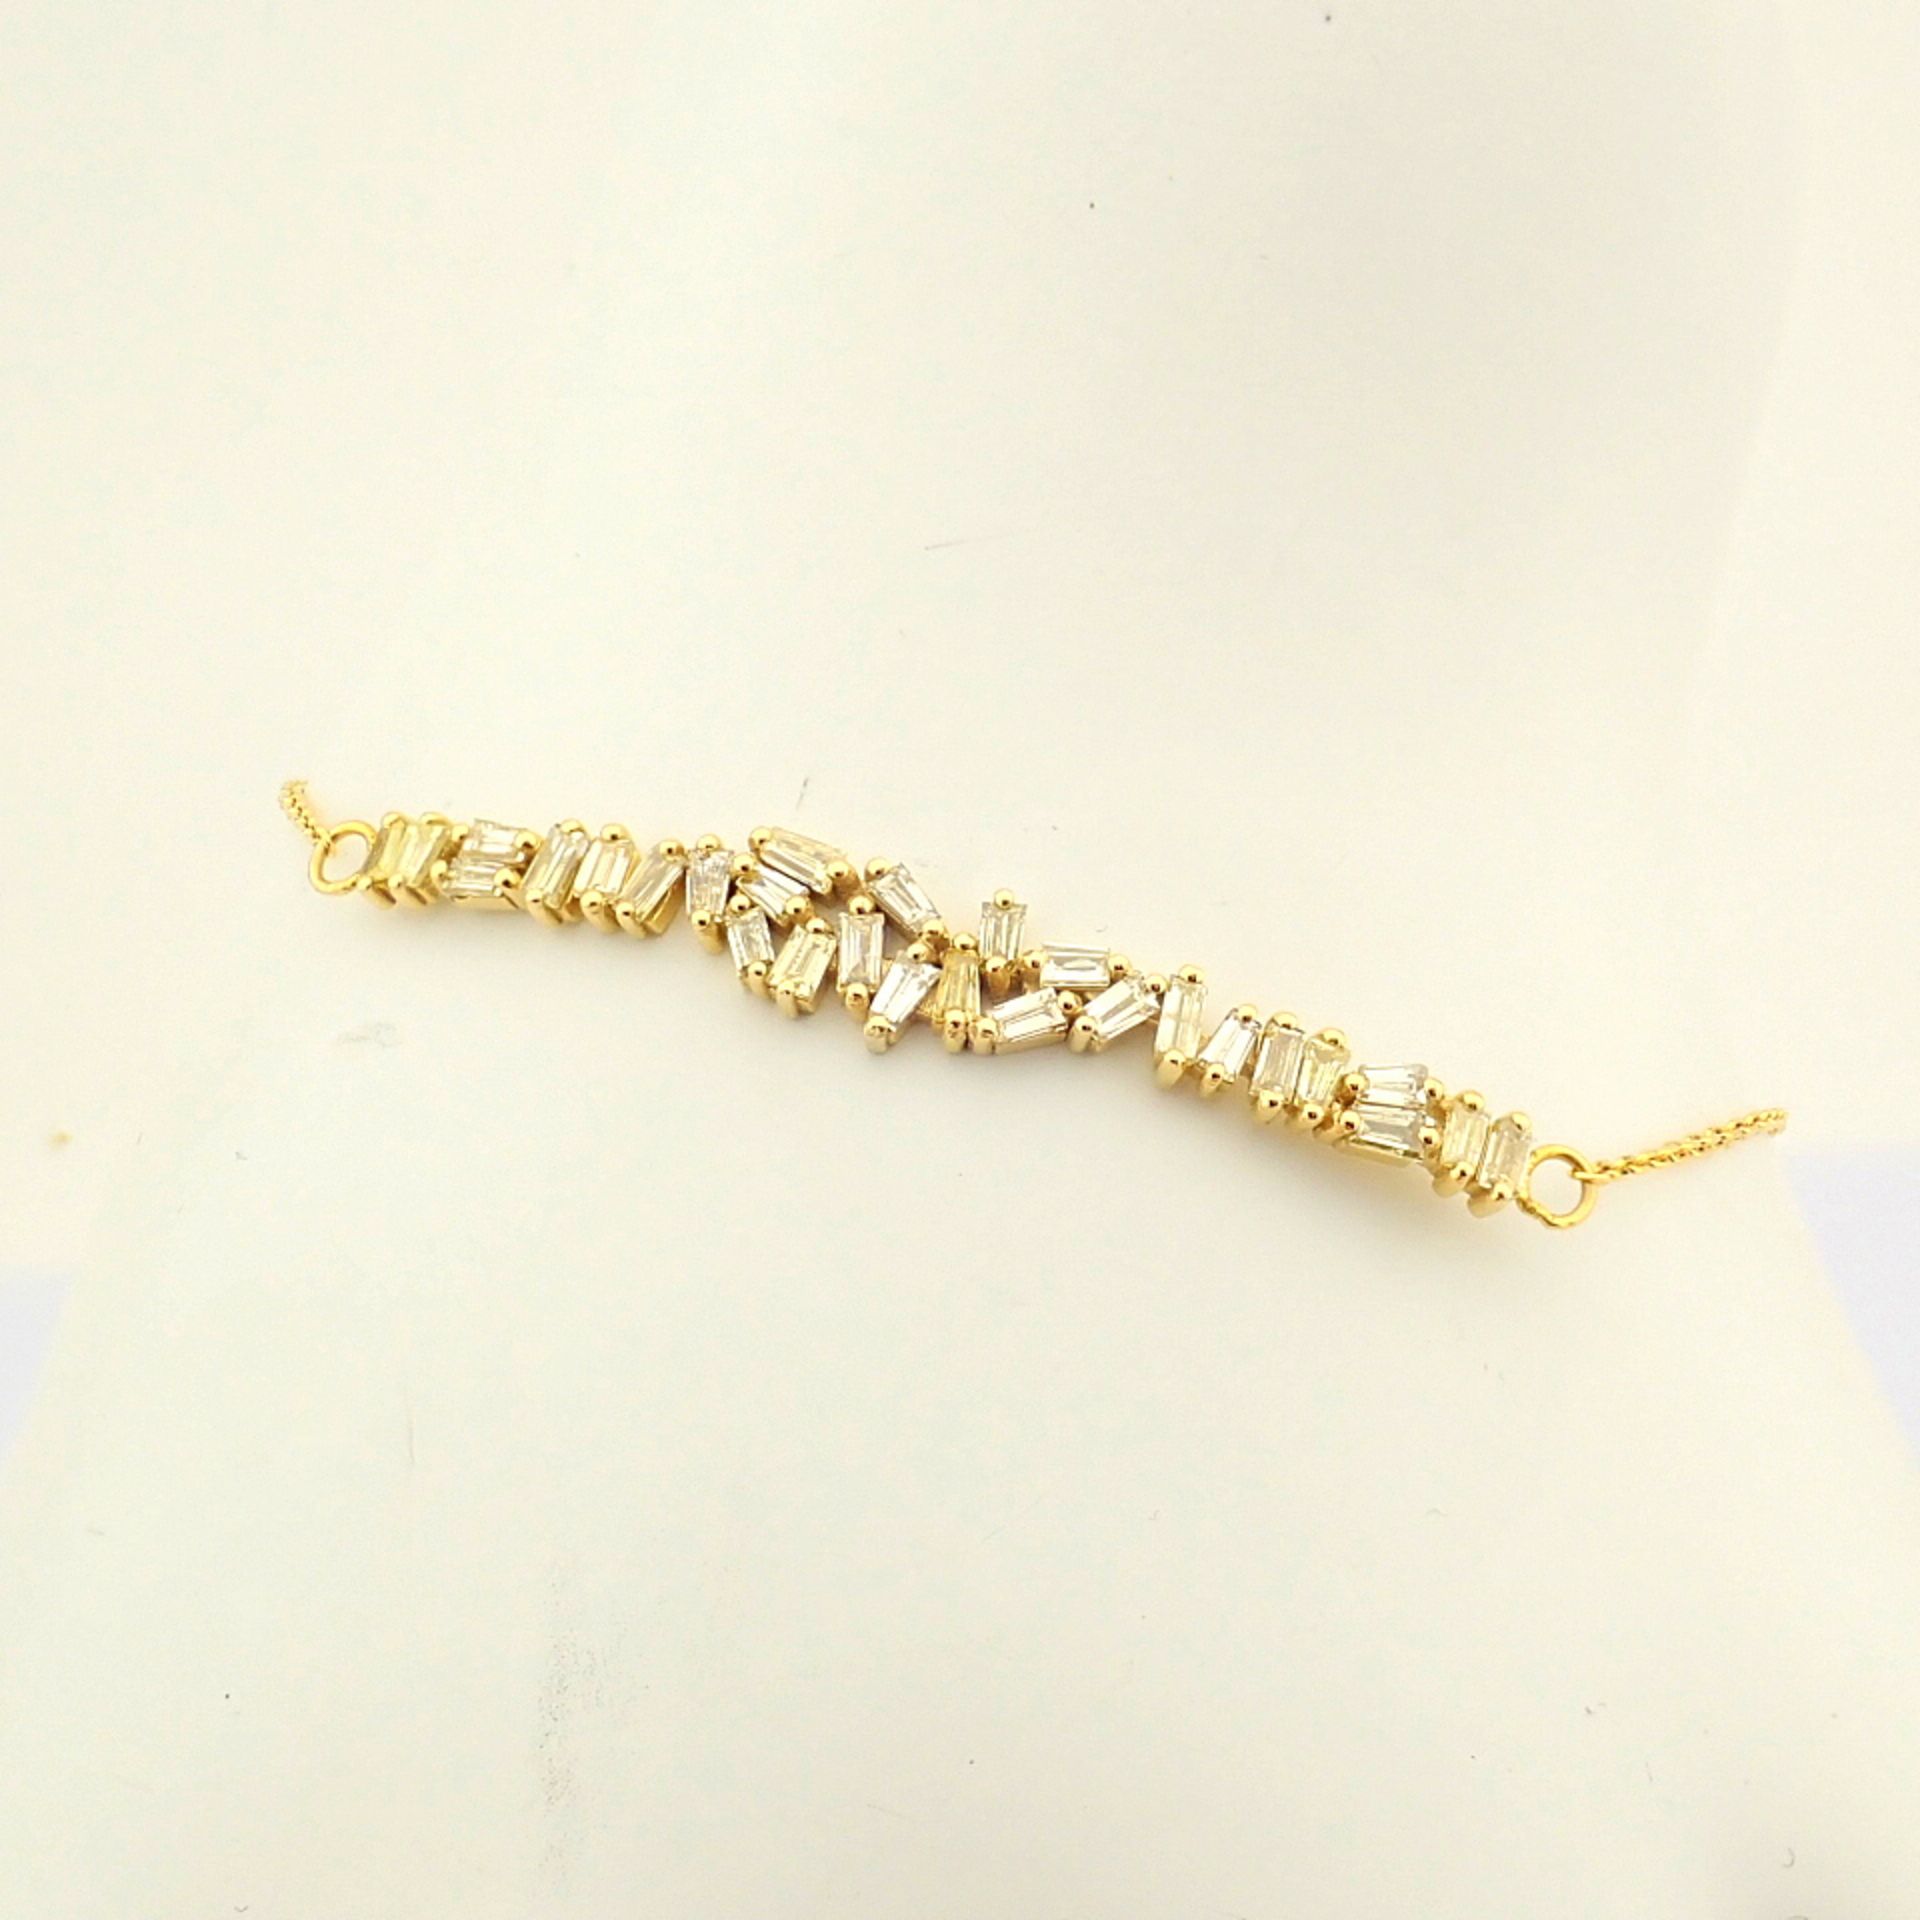 Certificated 14K Yellow Gold Fancy Diamond Bracelet (Total 0.84 ct Stone) - Image 5 of 7